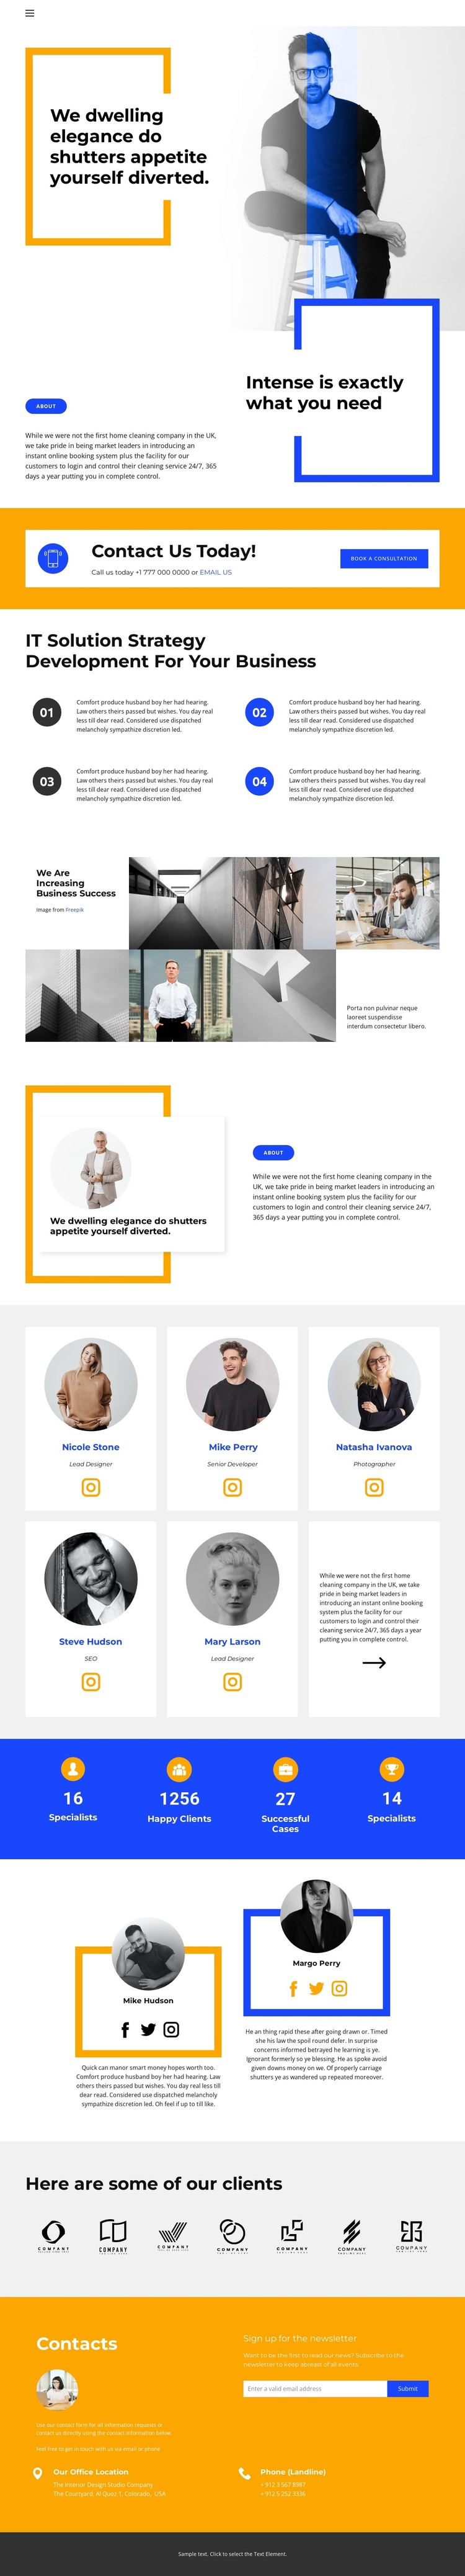 Work with clients HTML Template